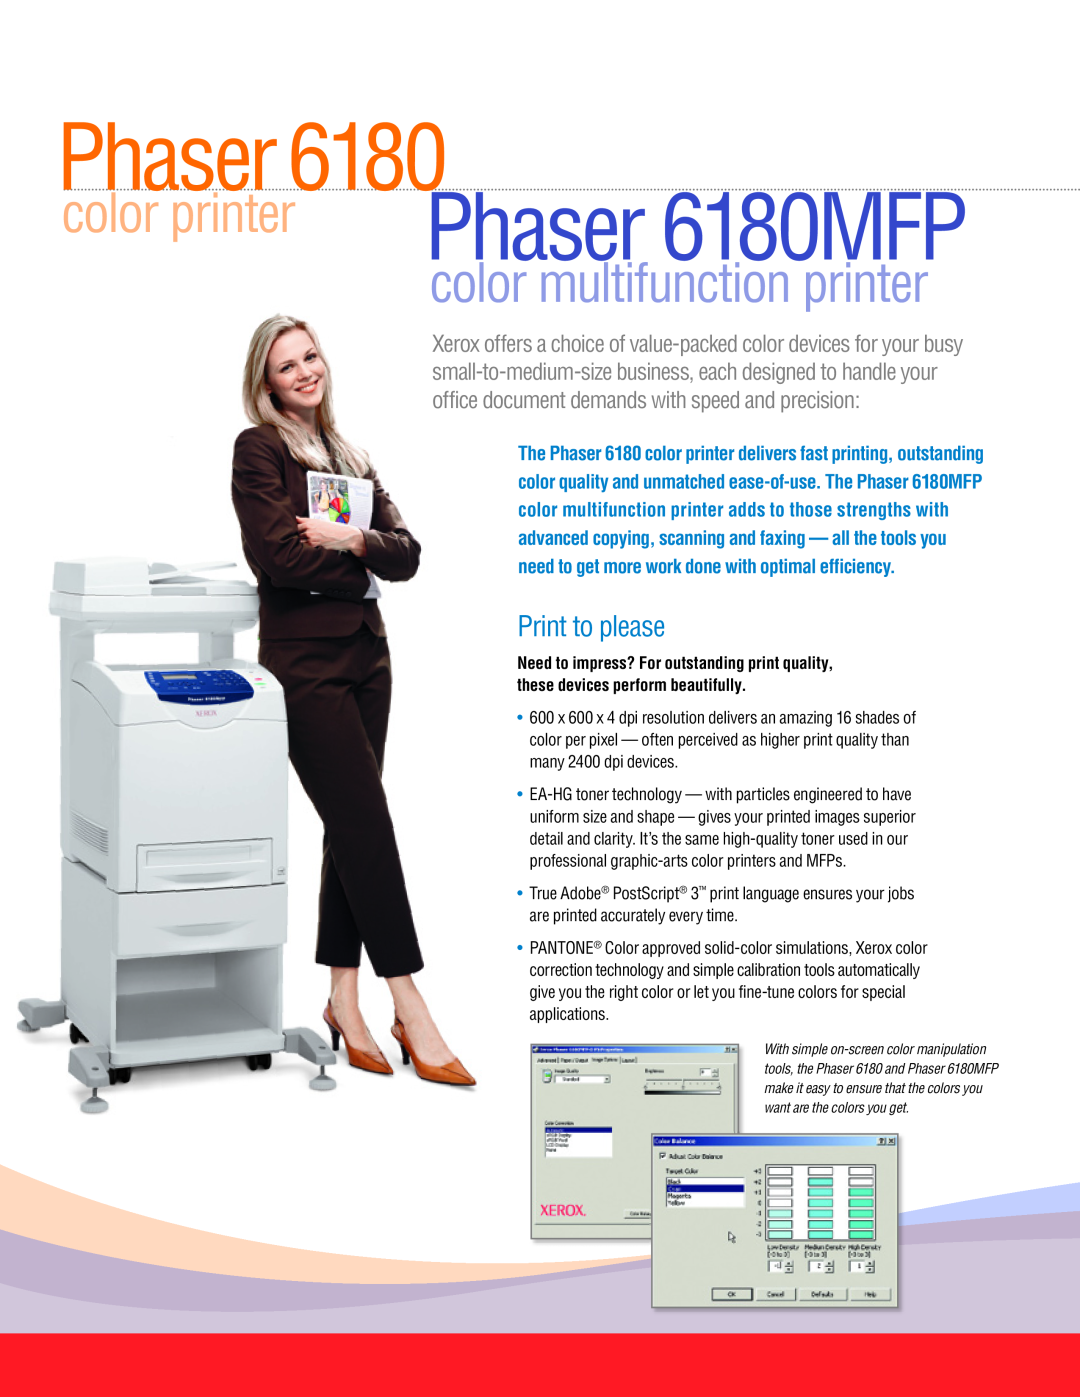 Xerox manual color printer Phaser 6180MFP, color multifunction printer, Print to please 